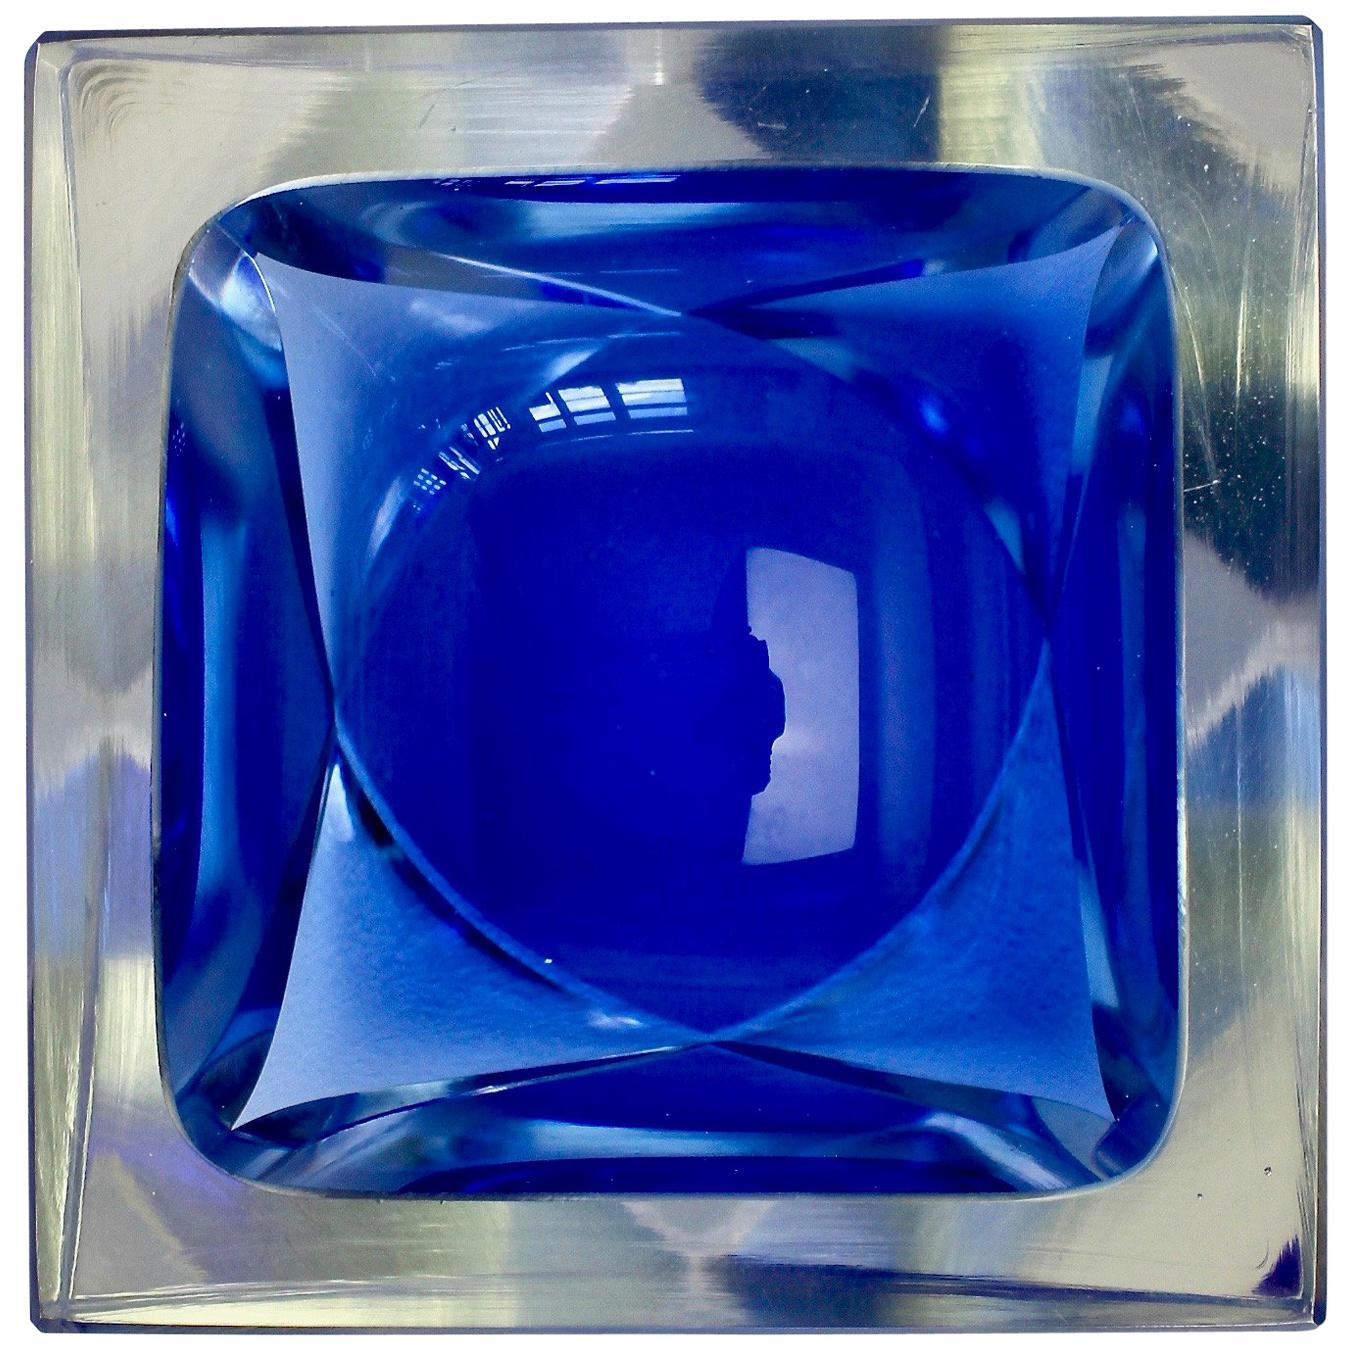 Faceted Blue and Clear Murano Sommerso Cut Glass Bowl Attributed to Mandruzzato 